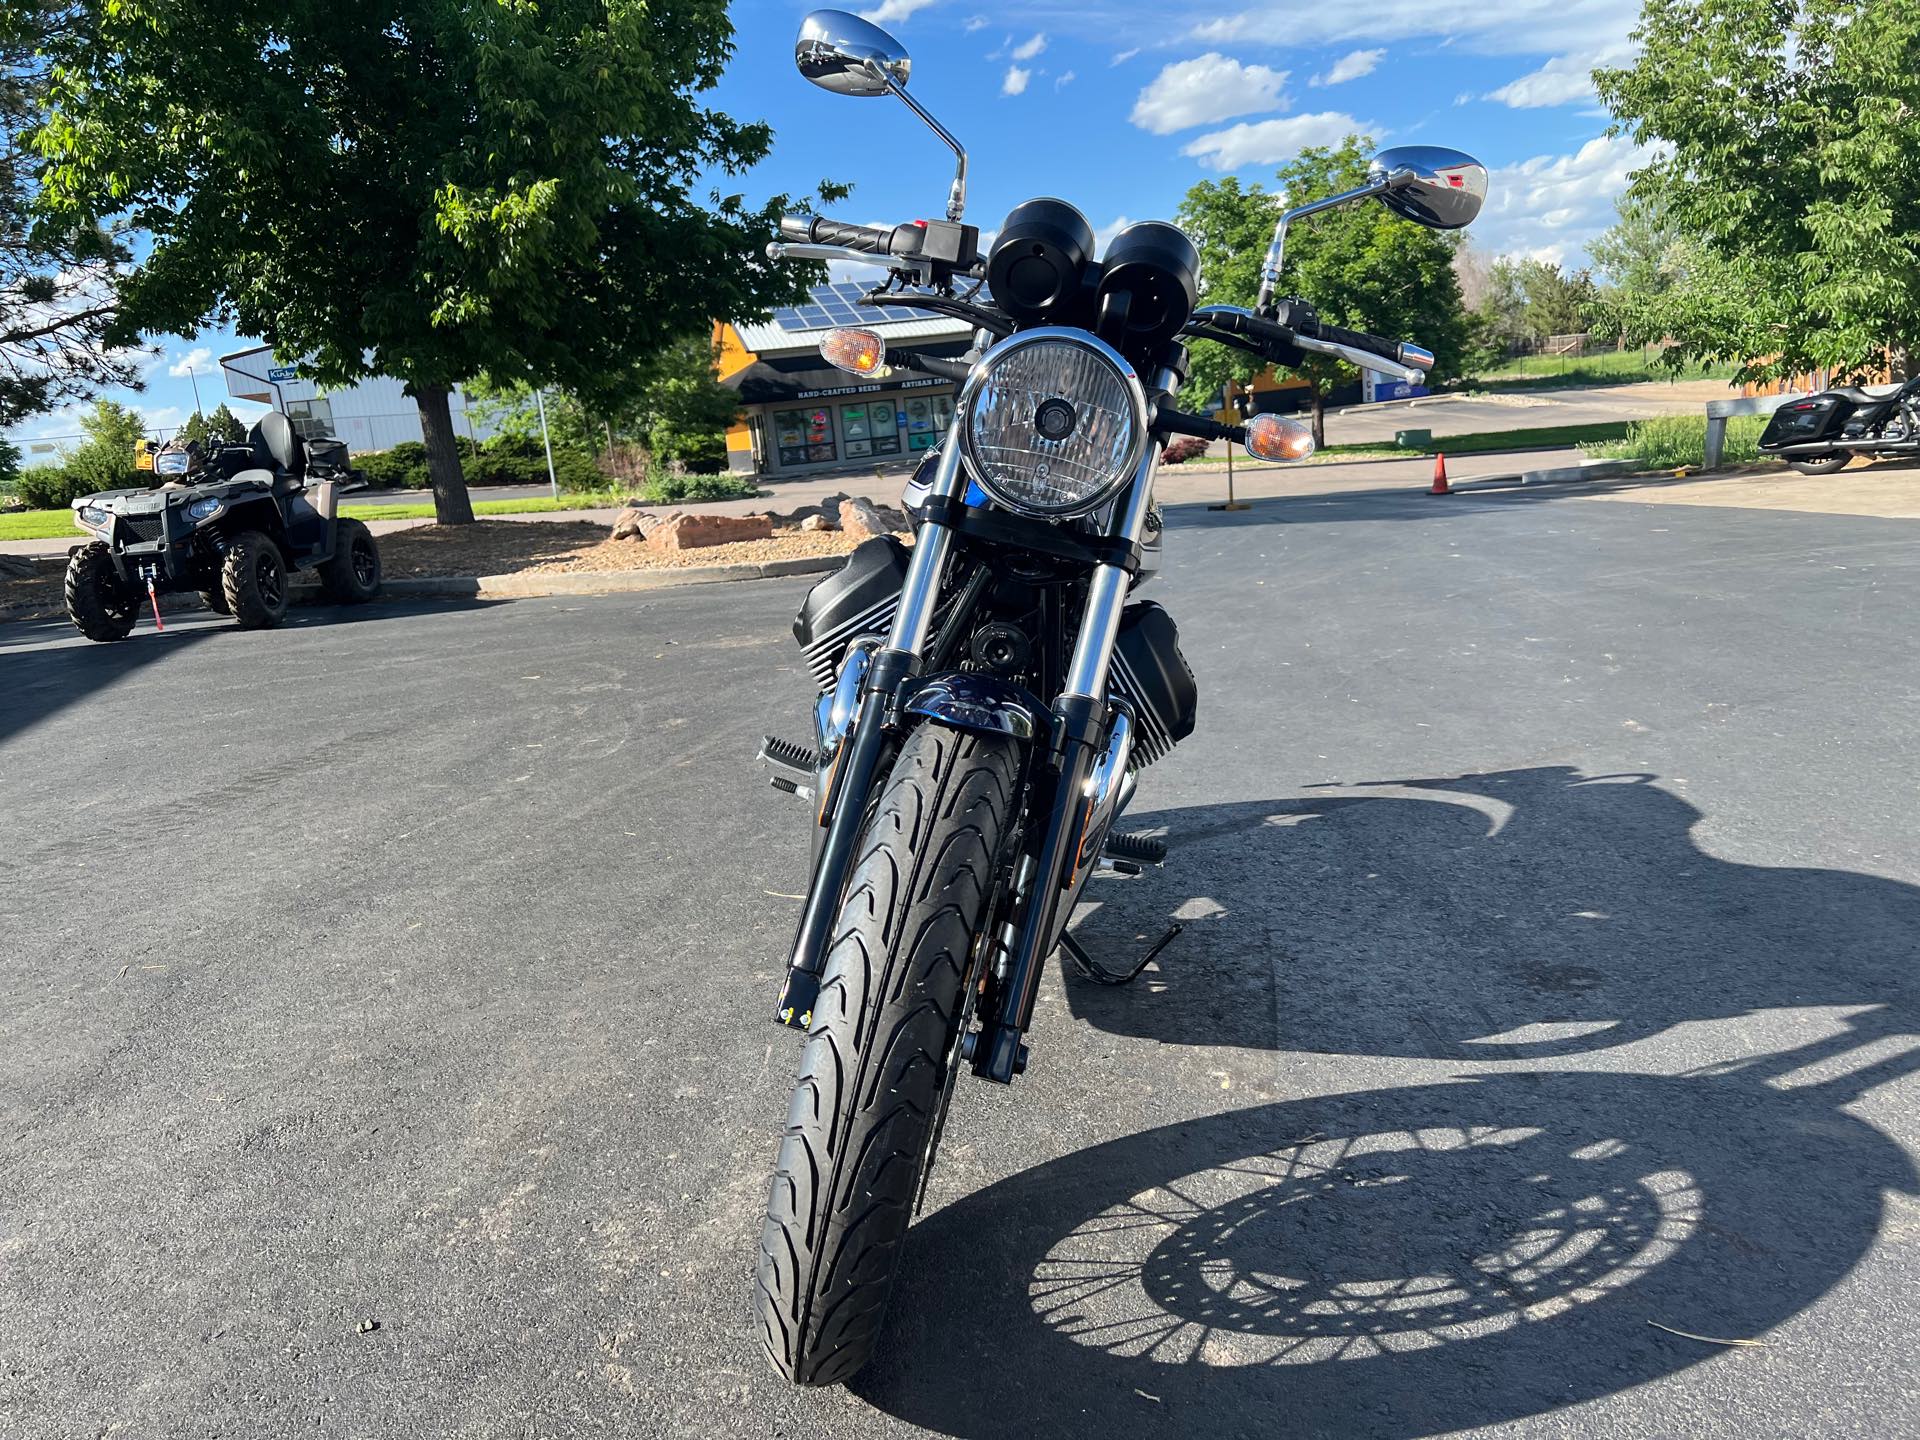 2022 Moto Guzzi V7 Special E5 at Aces Motorcycles - Fort Collins